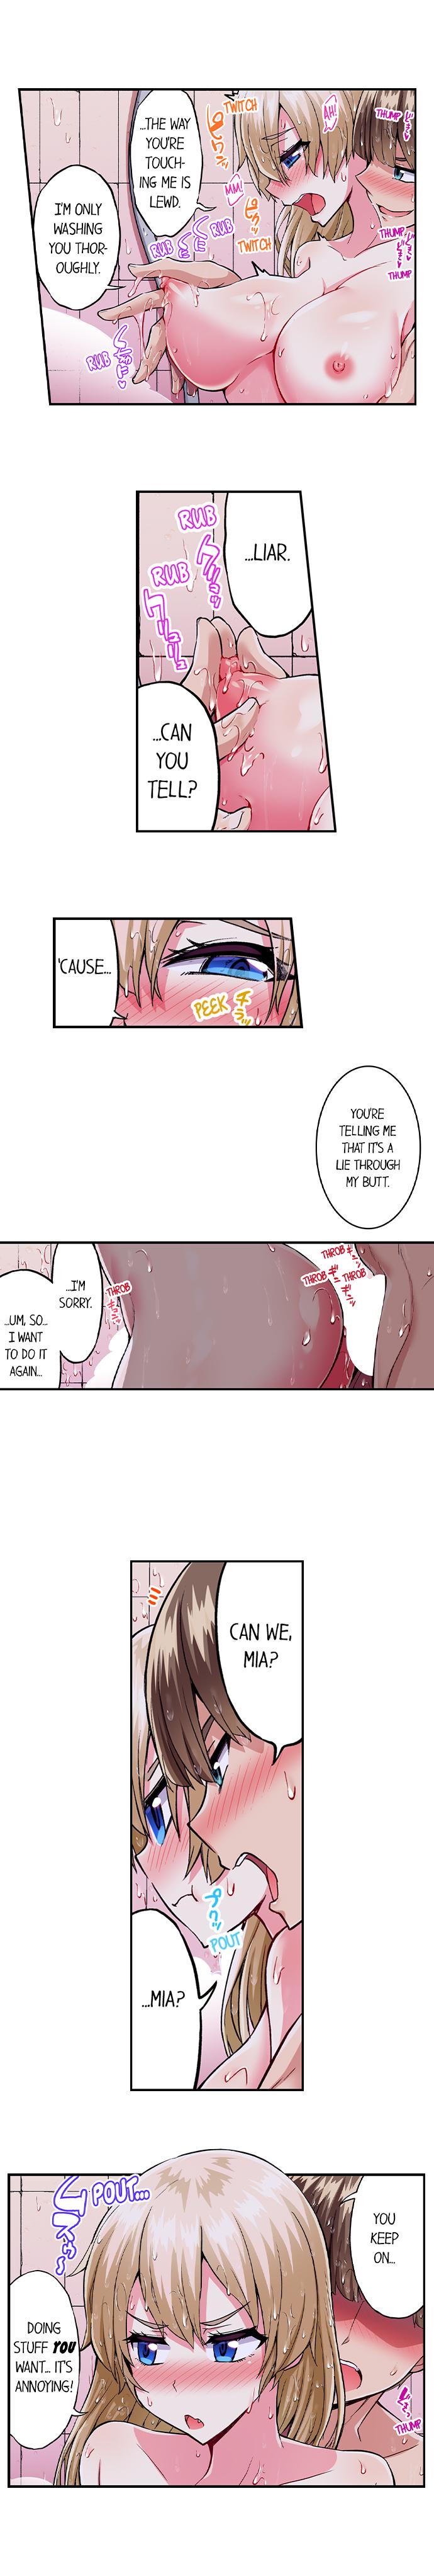 Traditional Job of Washing Girls’ Body - Chapter 182 Page 4